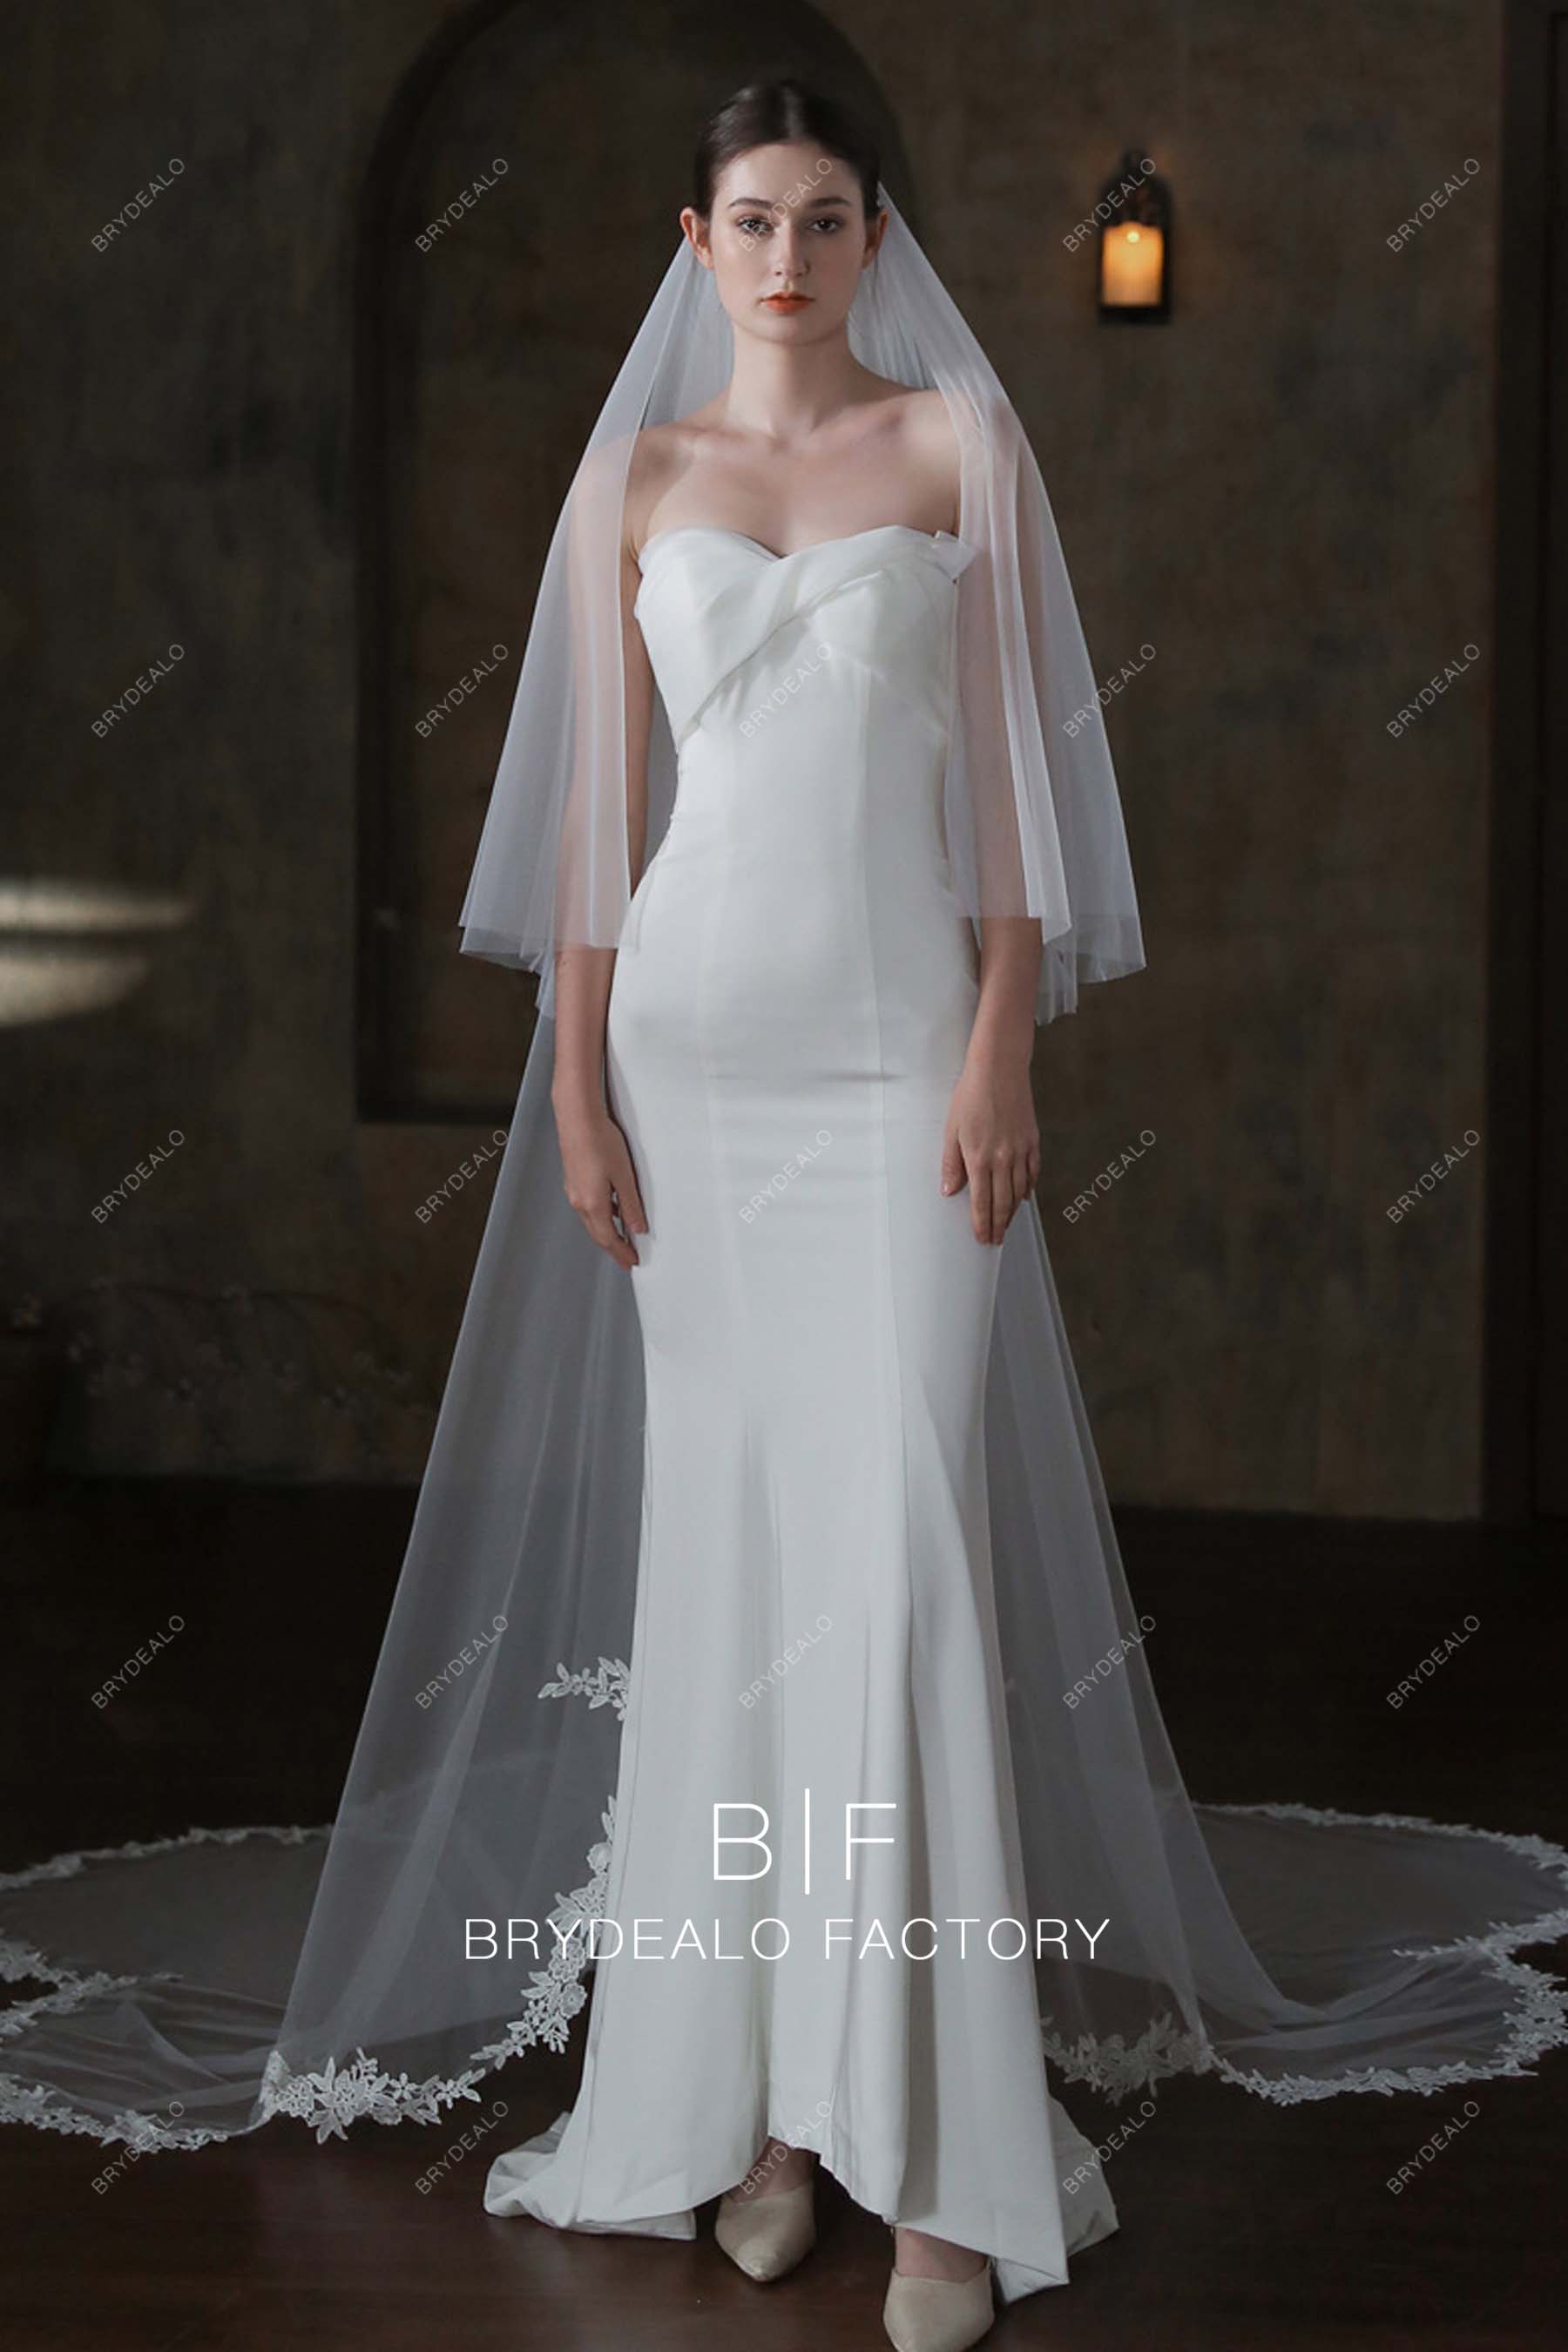 Two Tiered Chapel Length Lace Cutout Edge Bridal Veil